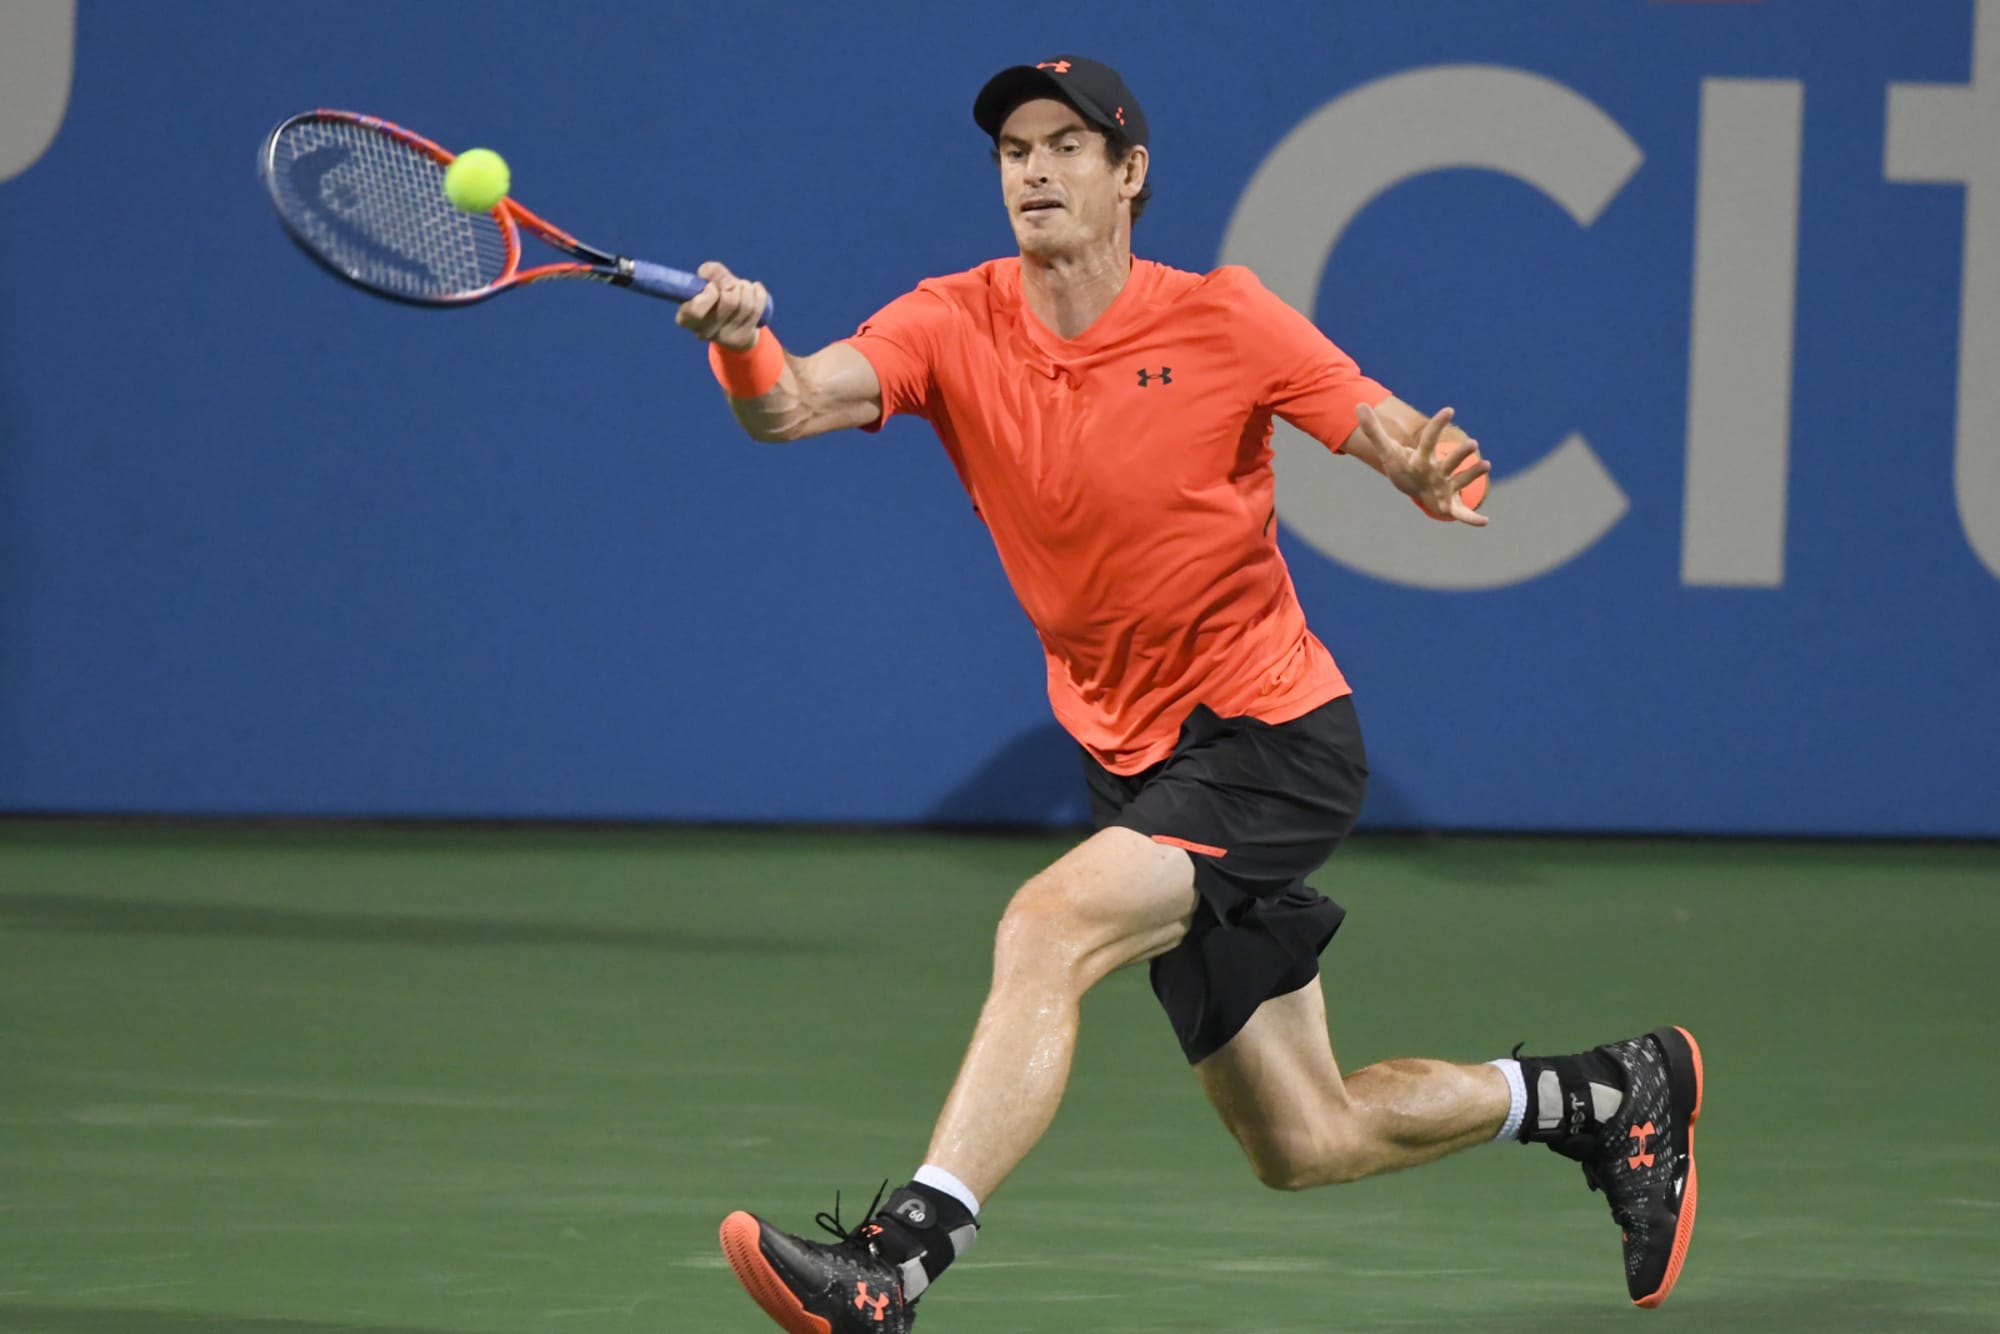 Citi Open Andy Murray reaches second round